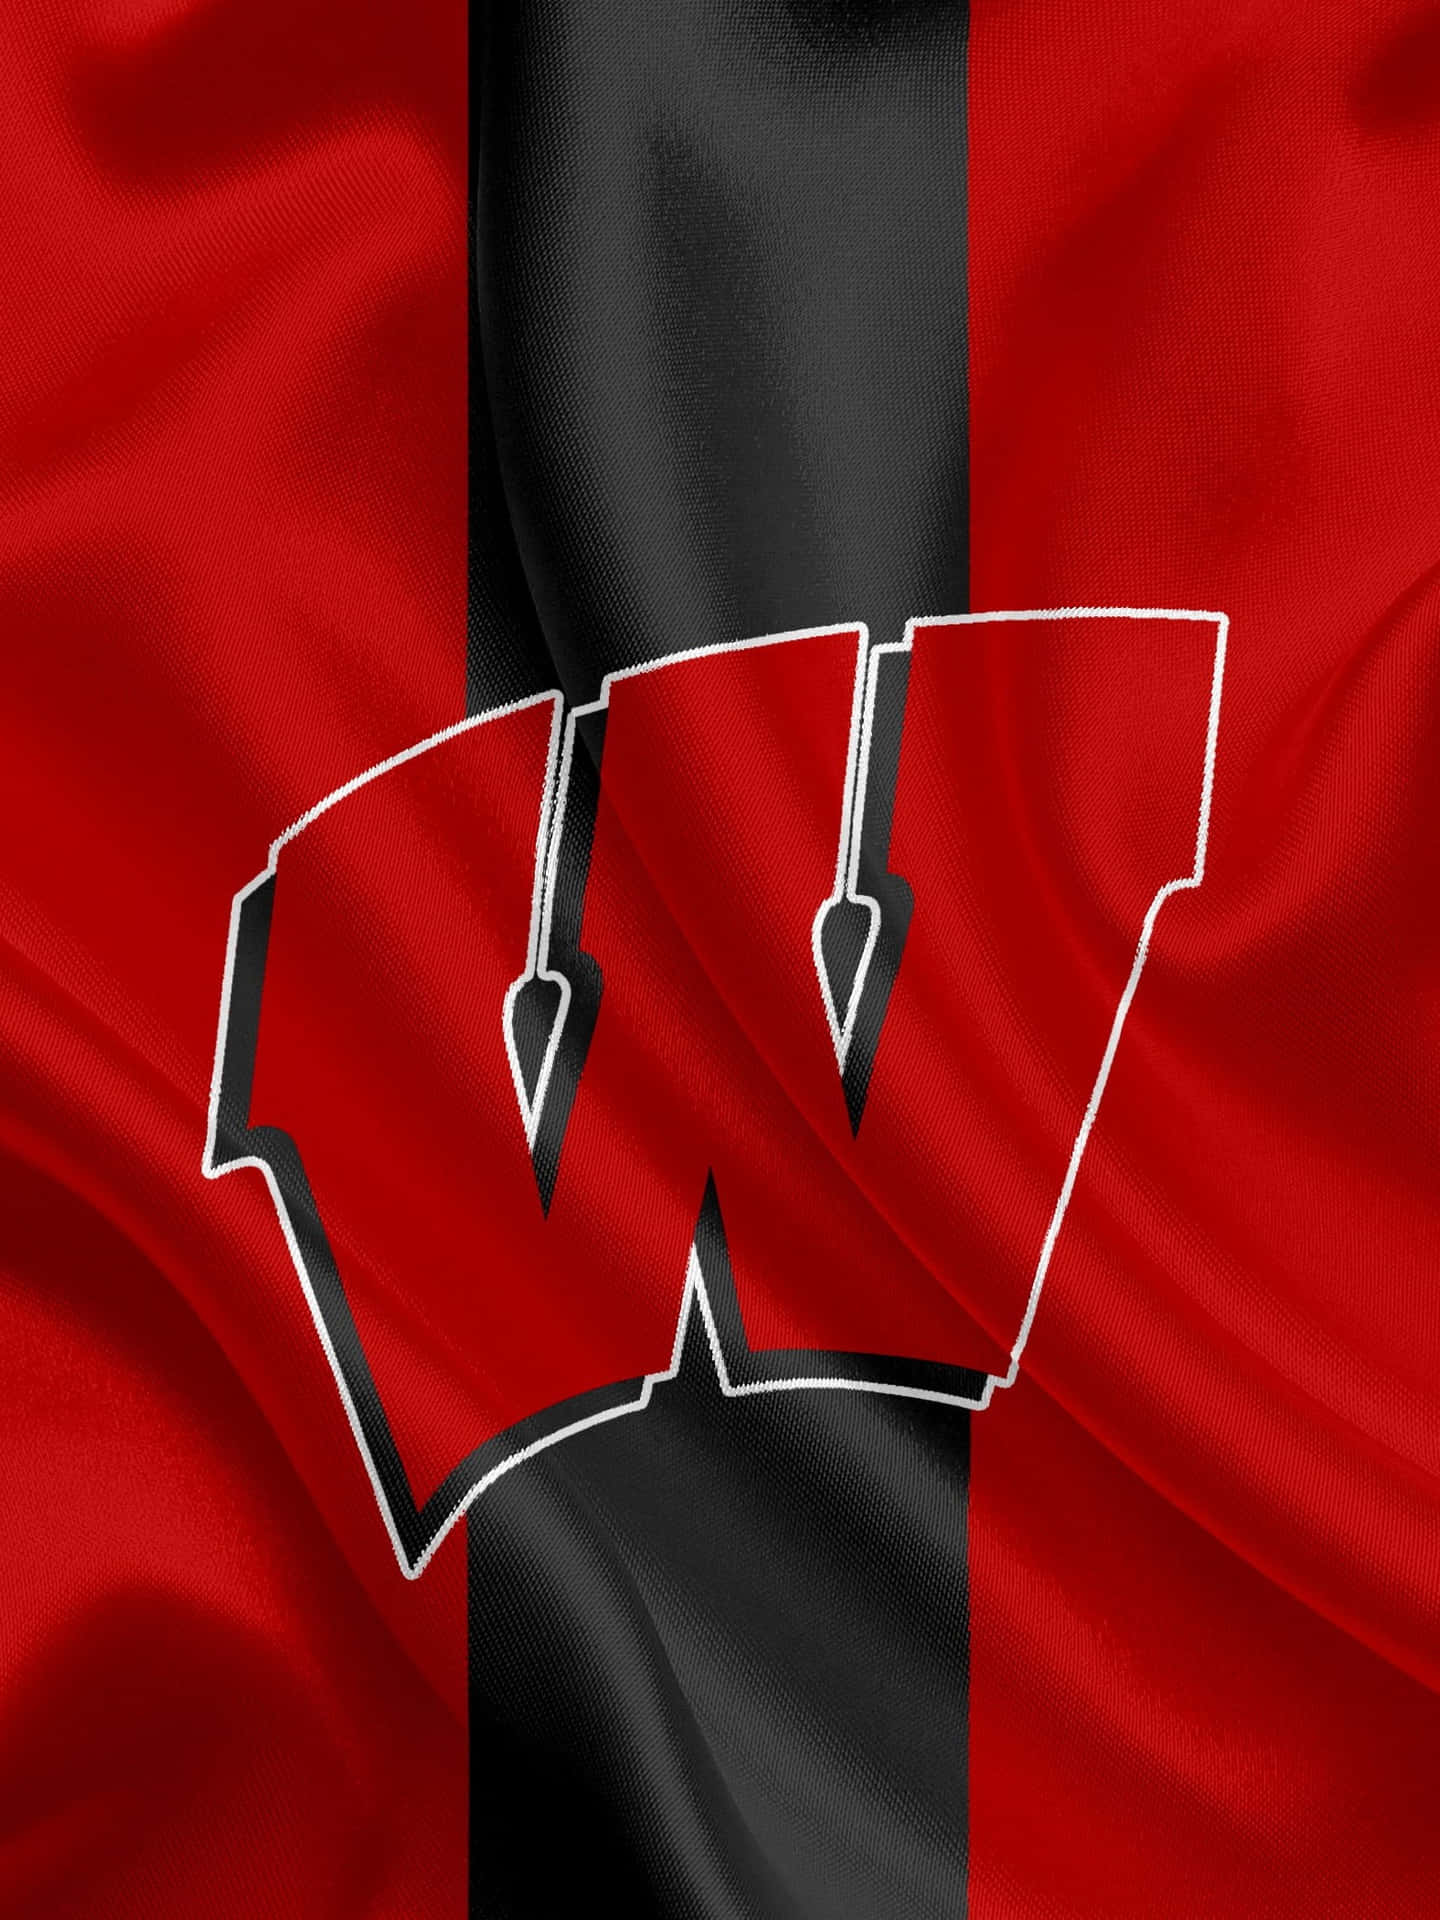 Wisconsin Badgers Logo on a Vibrant Red Background Wallpaper